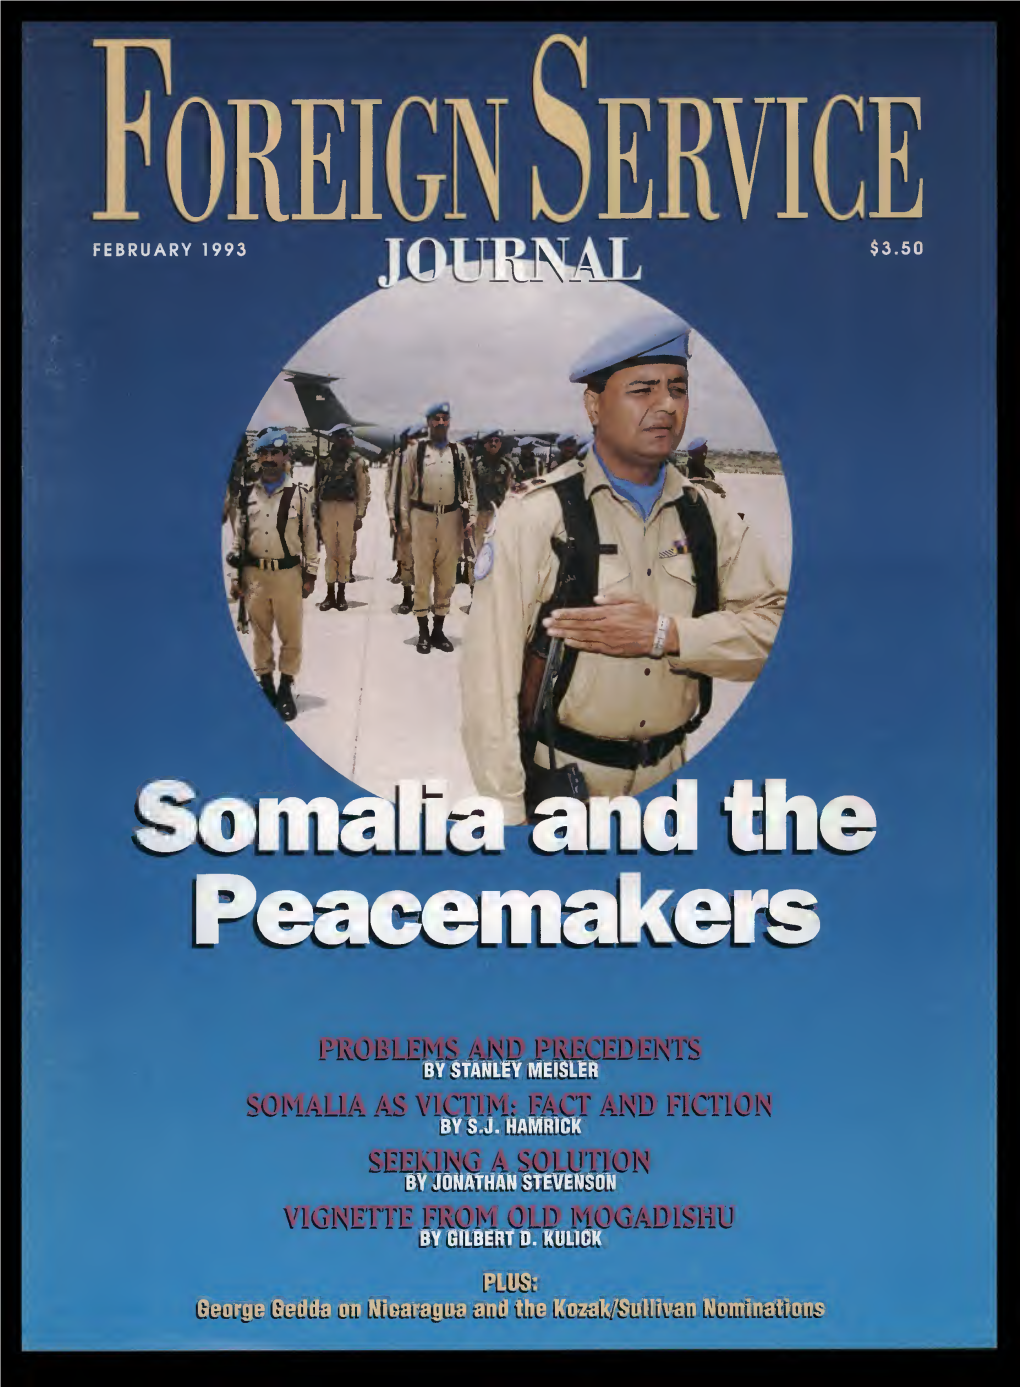 The Foreign Service Journal, February 1993